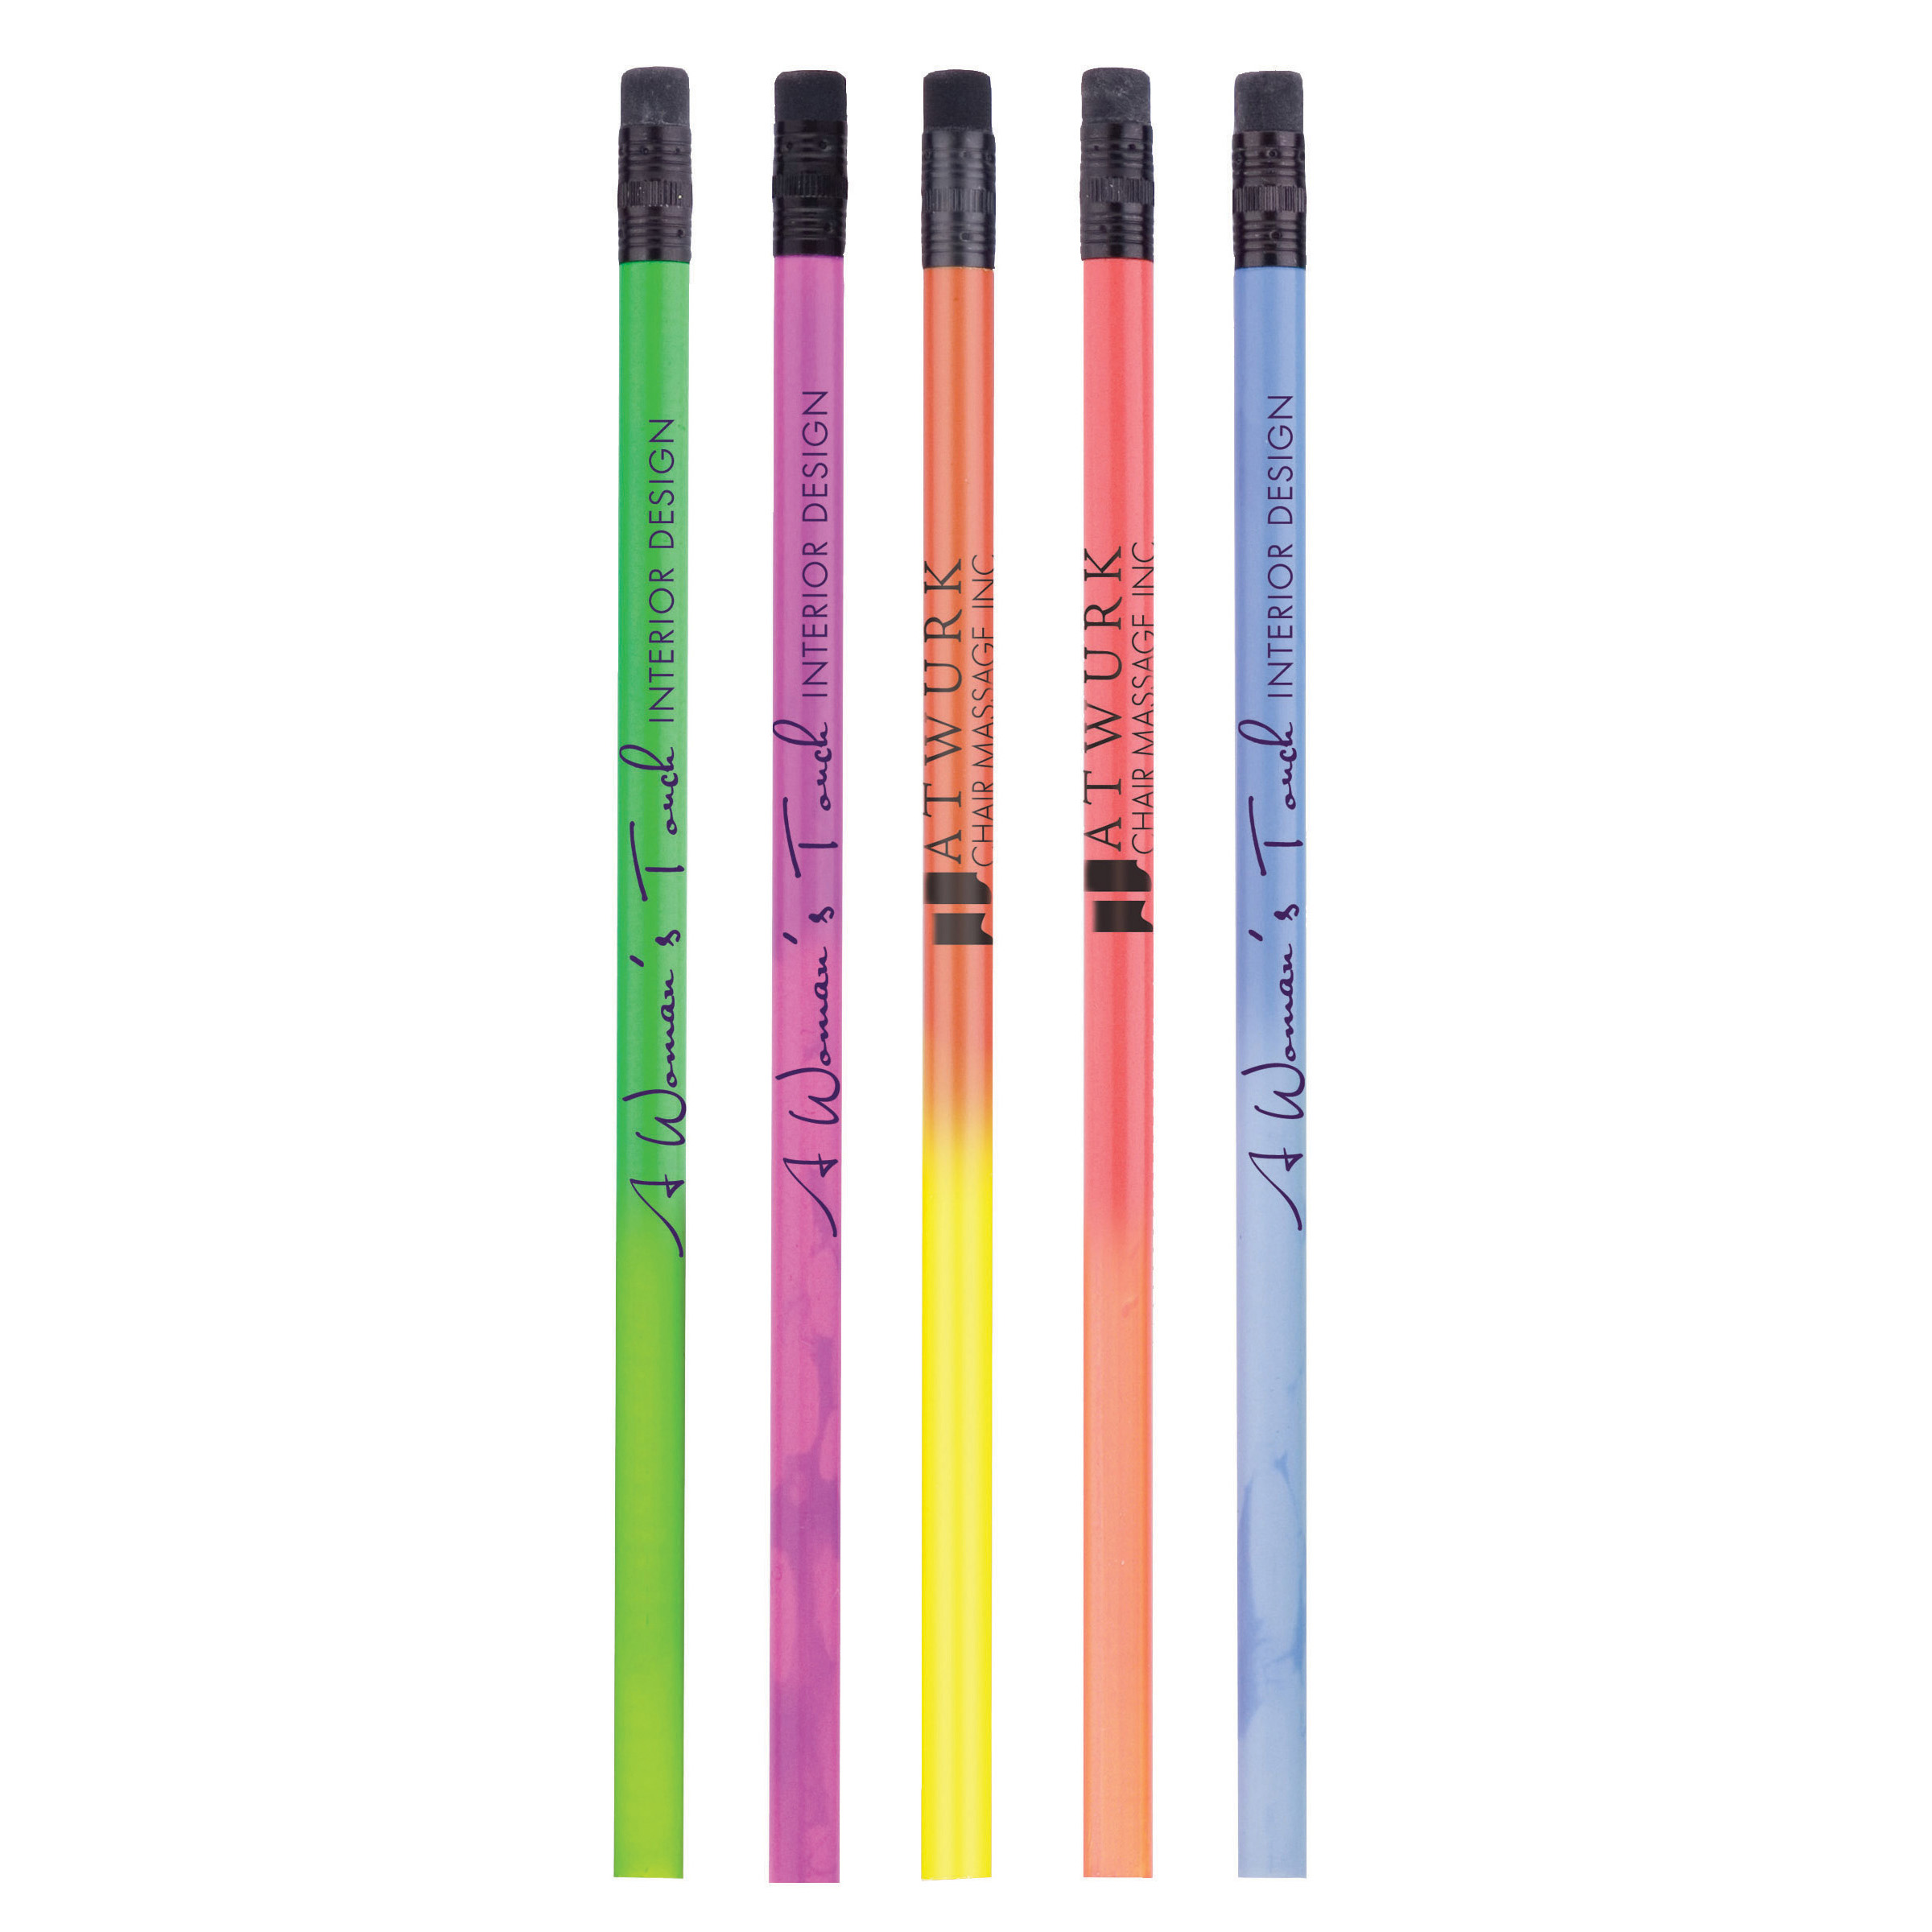 Personalized Pencils Recycled Pencils Color Changing Pencils